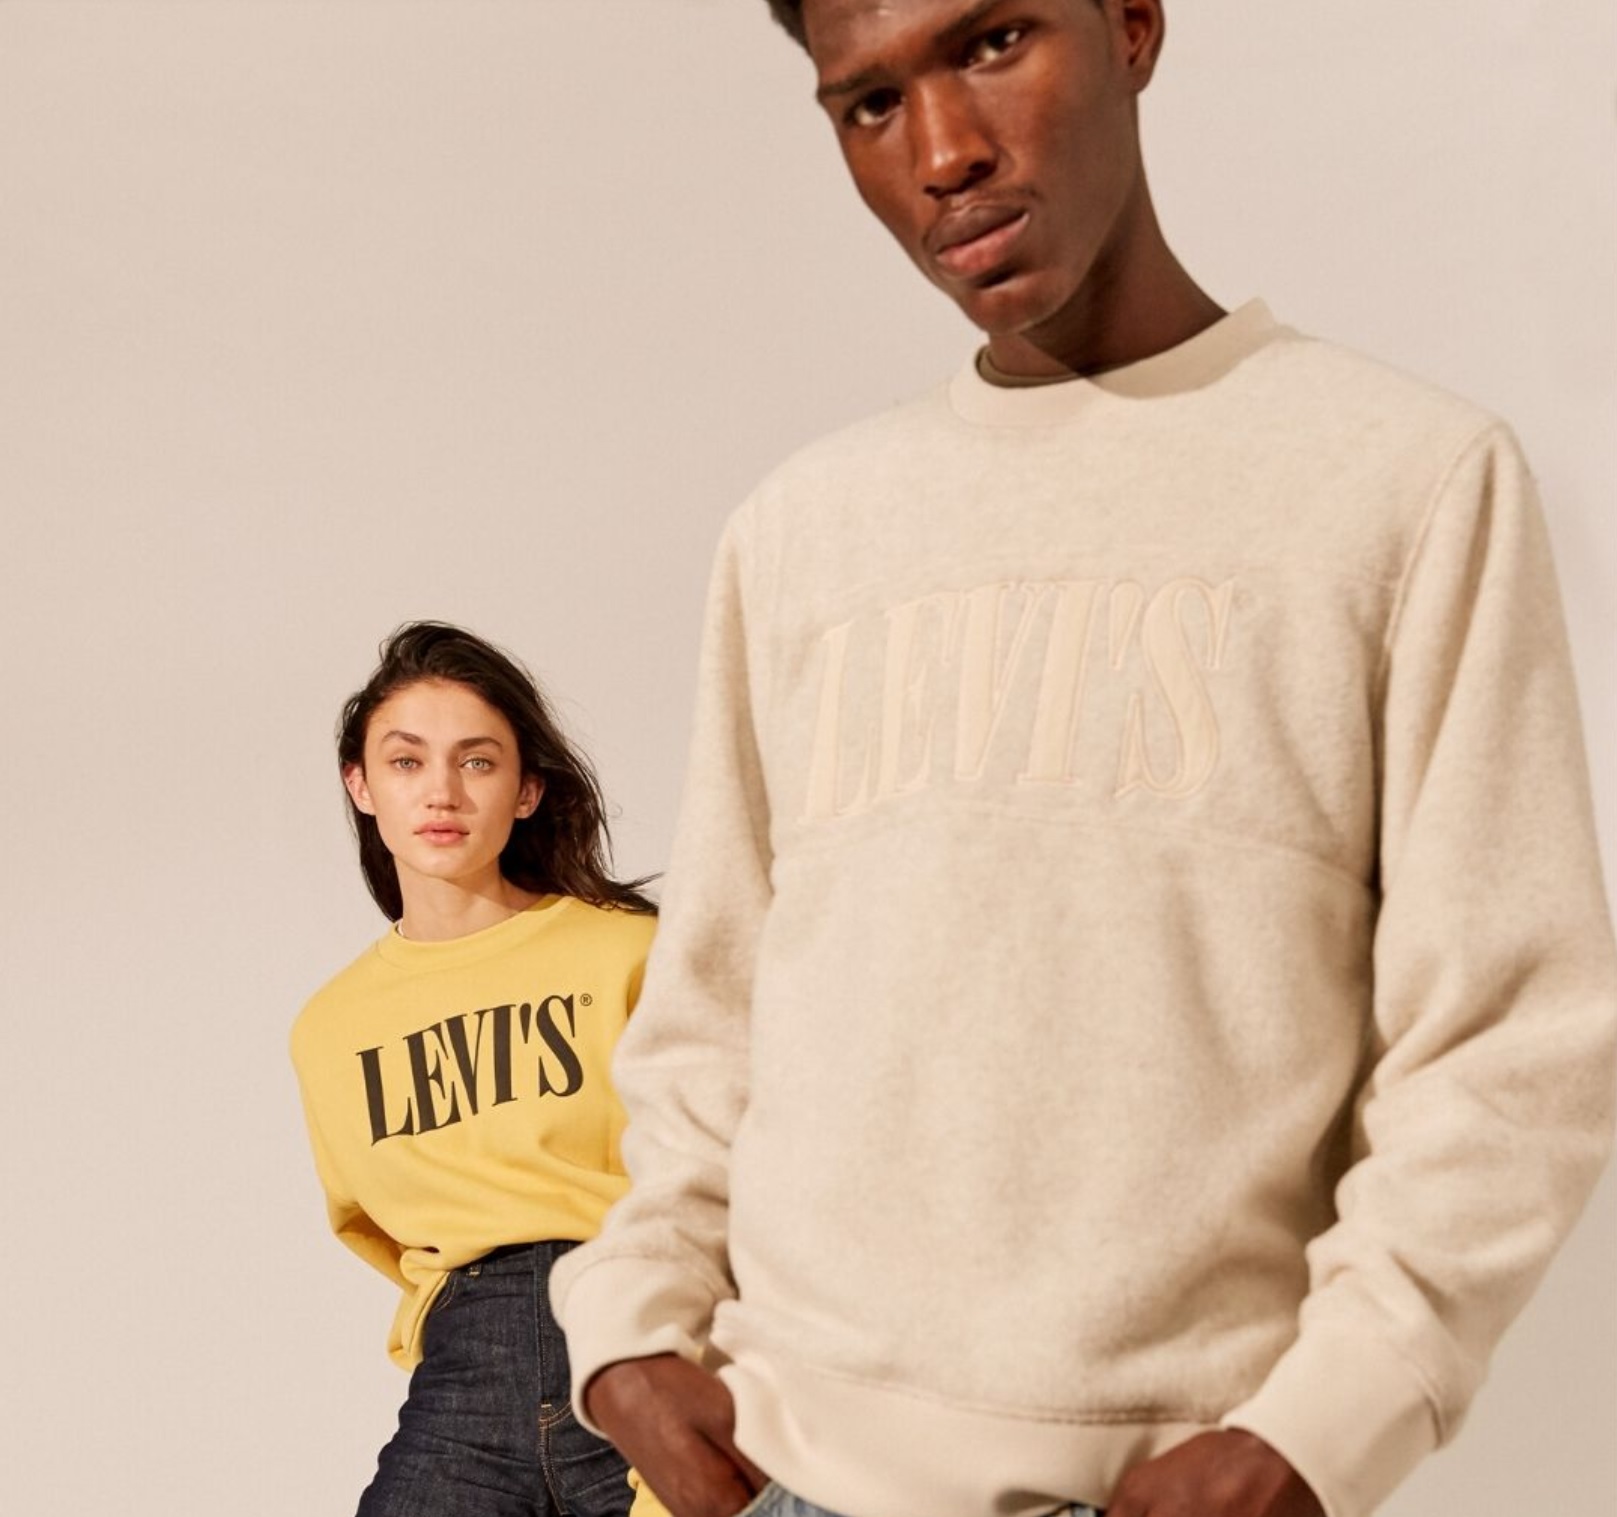 levis shipping code